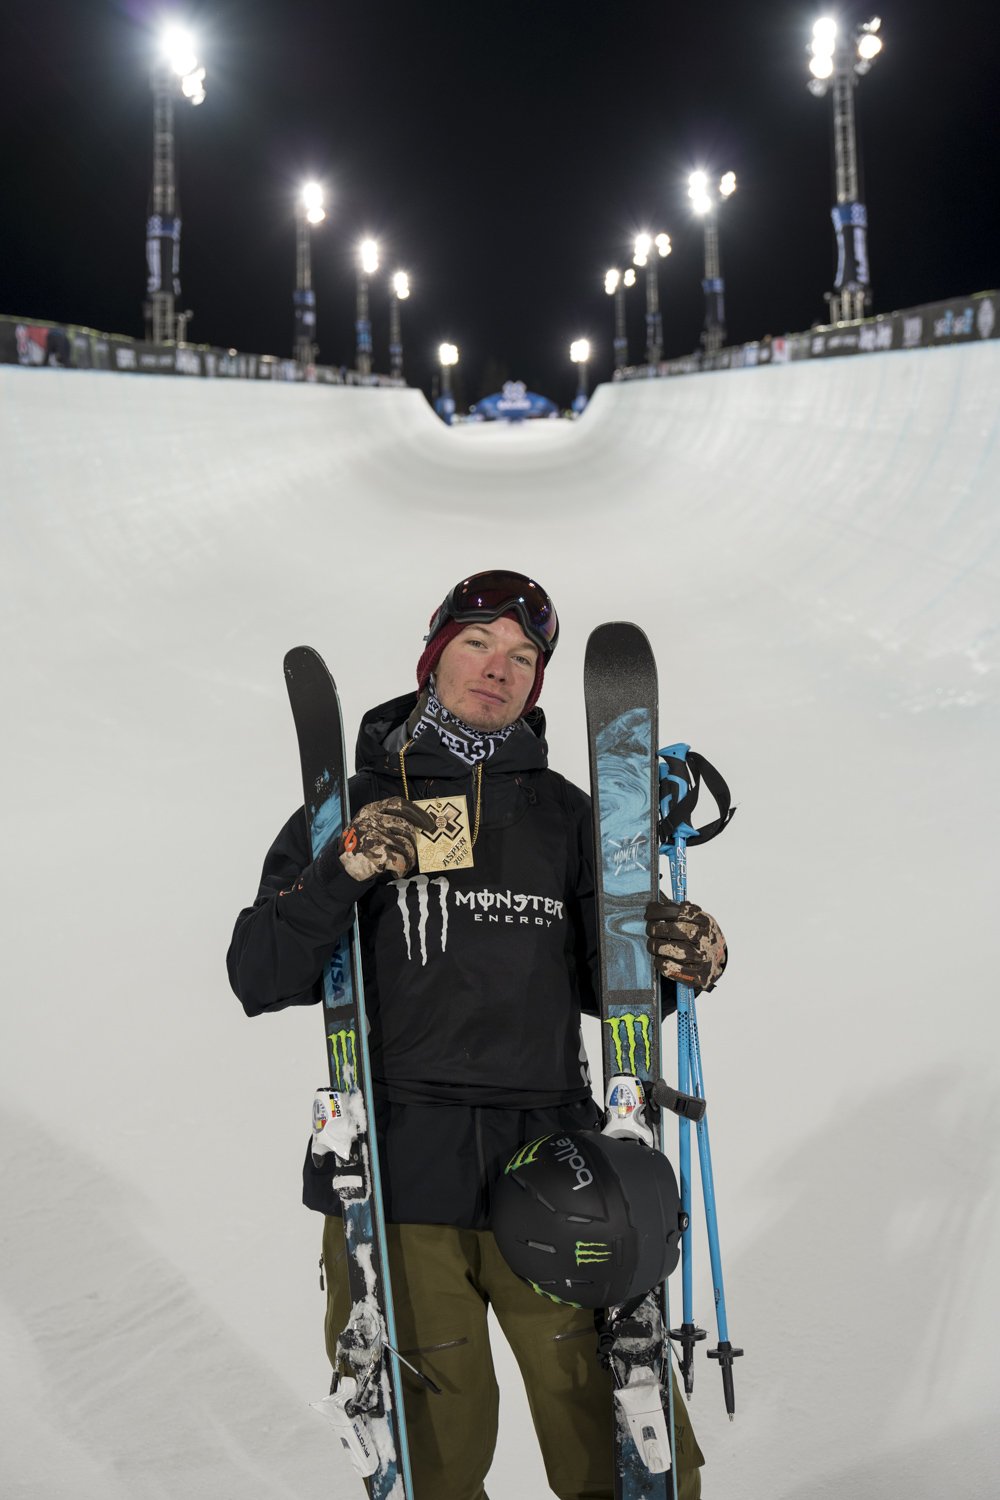 Monster Energy's David Wise Will Compete in Men's Ski SuperPipe at X Games Aspen 2019